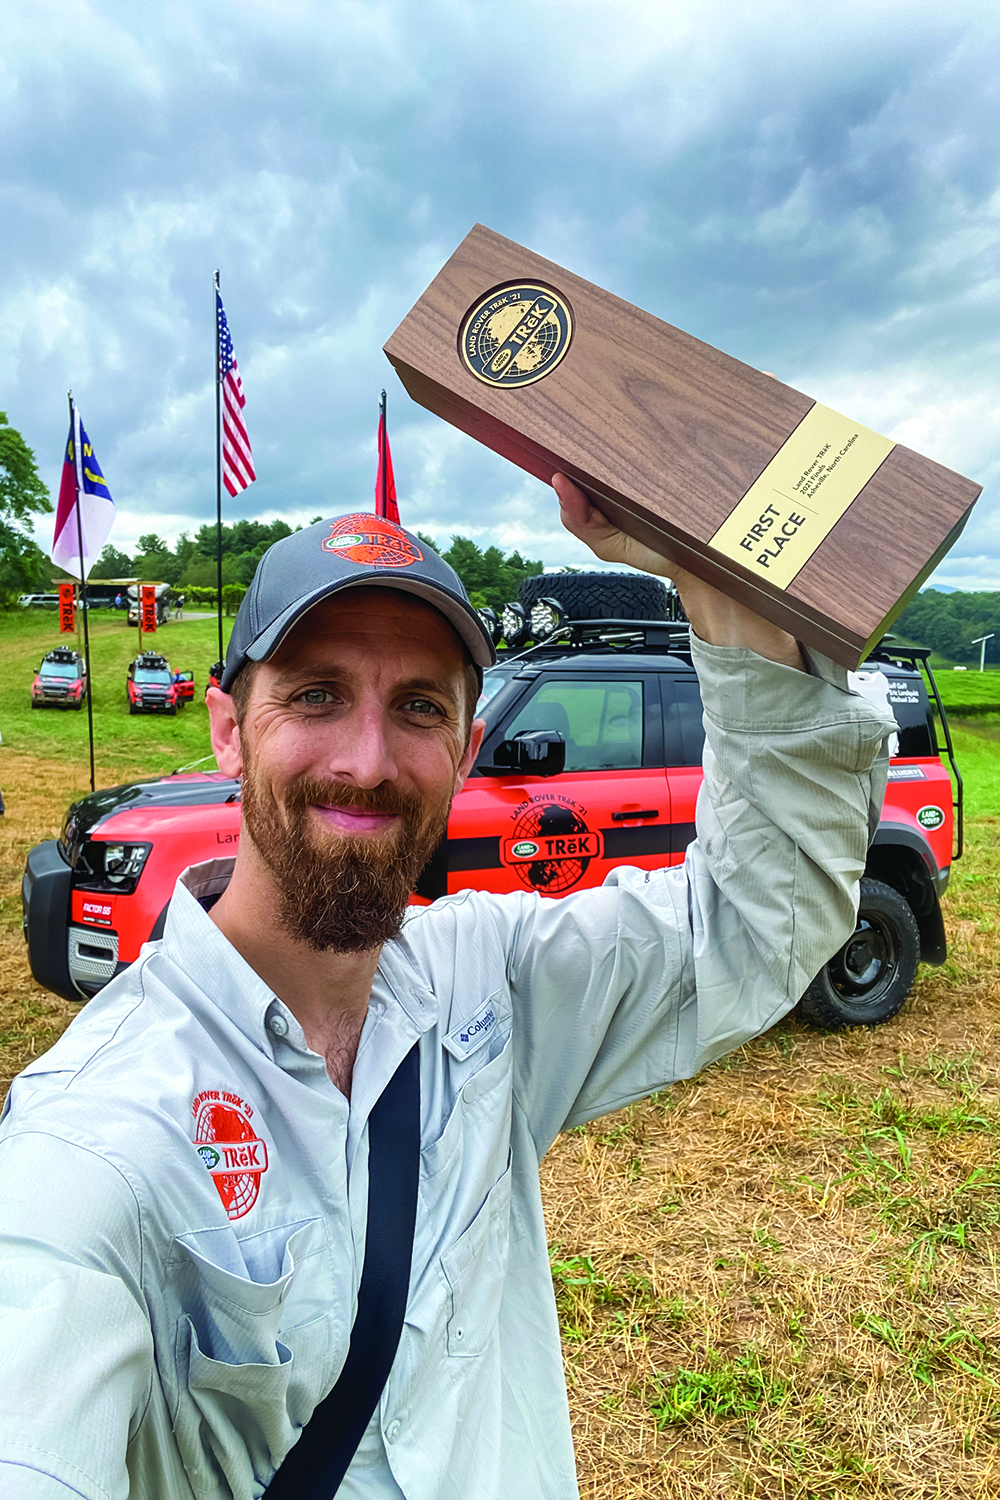 Bryon Dorr with the media wave winning trophy for his team “No Time To Cry” at Land Rover TReK 2021